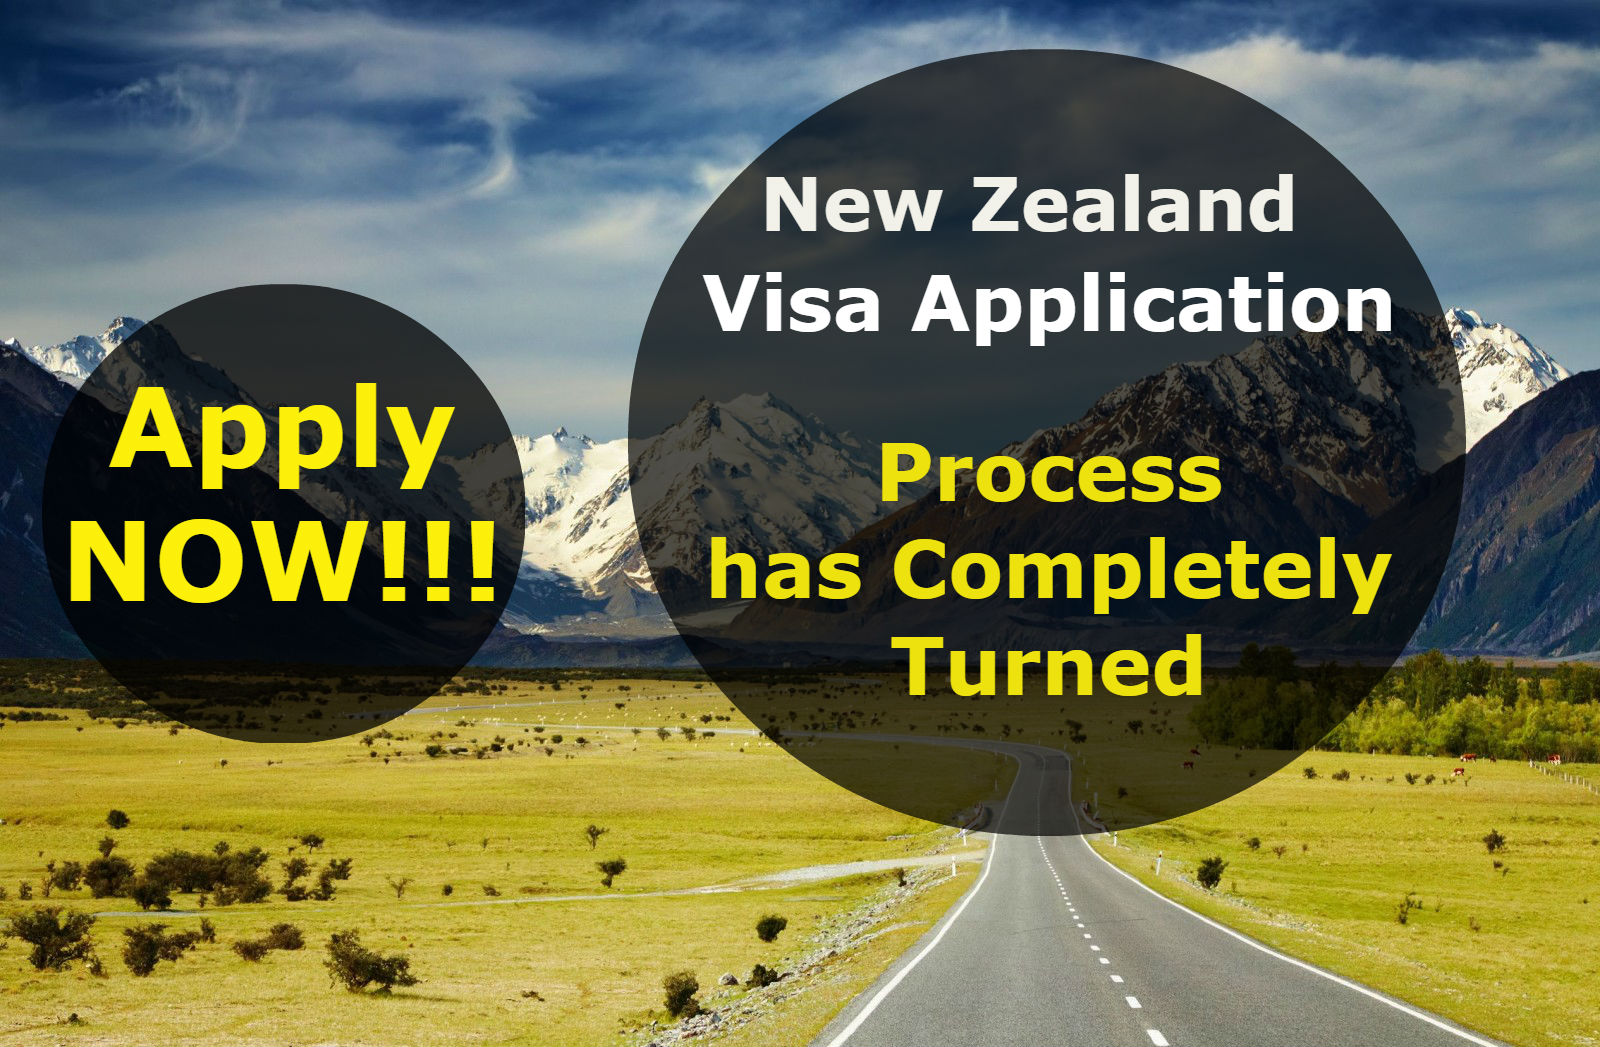 New Zealand Immigration – The Visa Application Process has Completely Turned Electronic